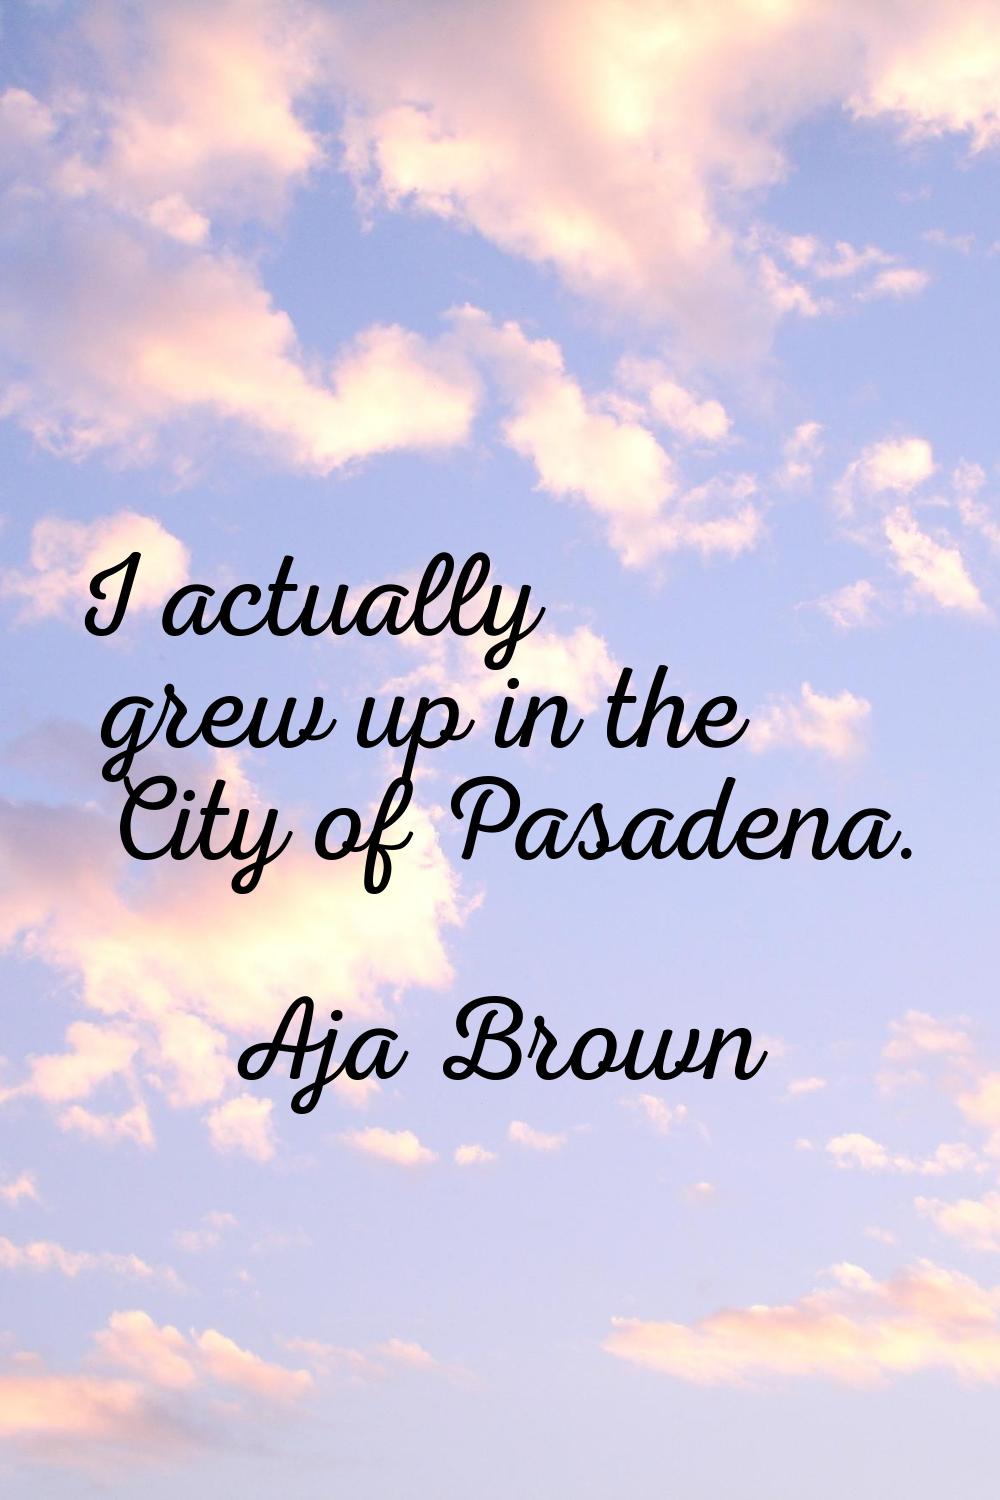 I actually grew up in the City of Pasadena.